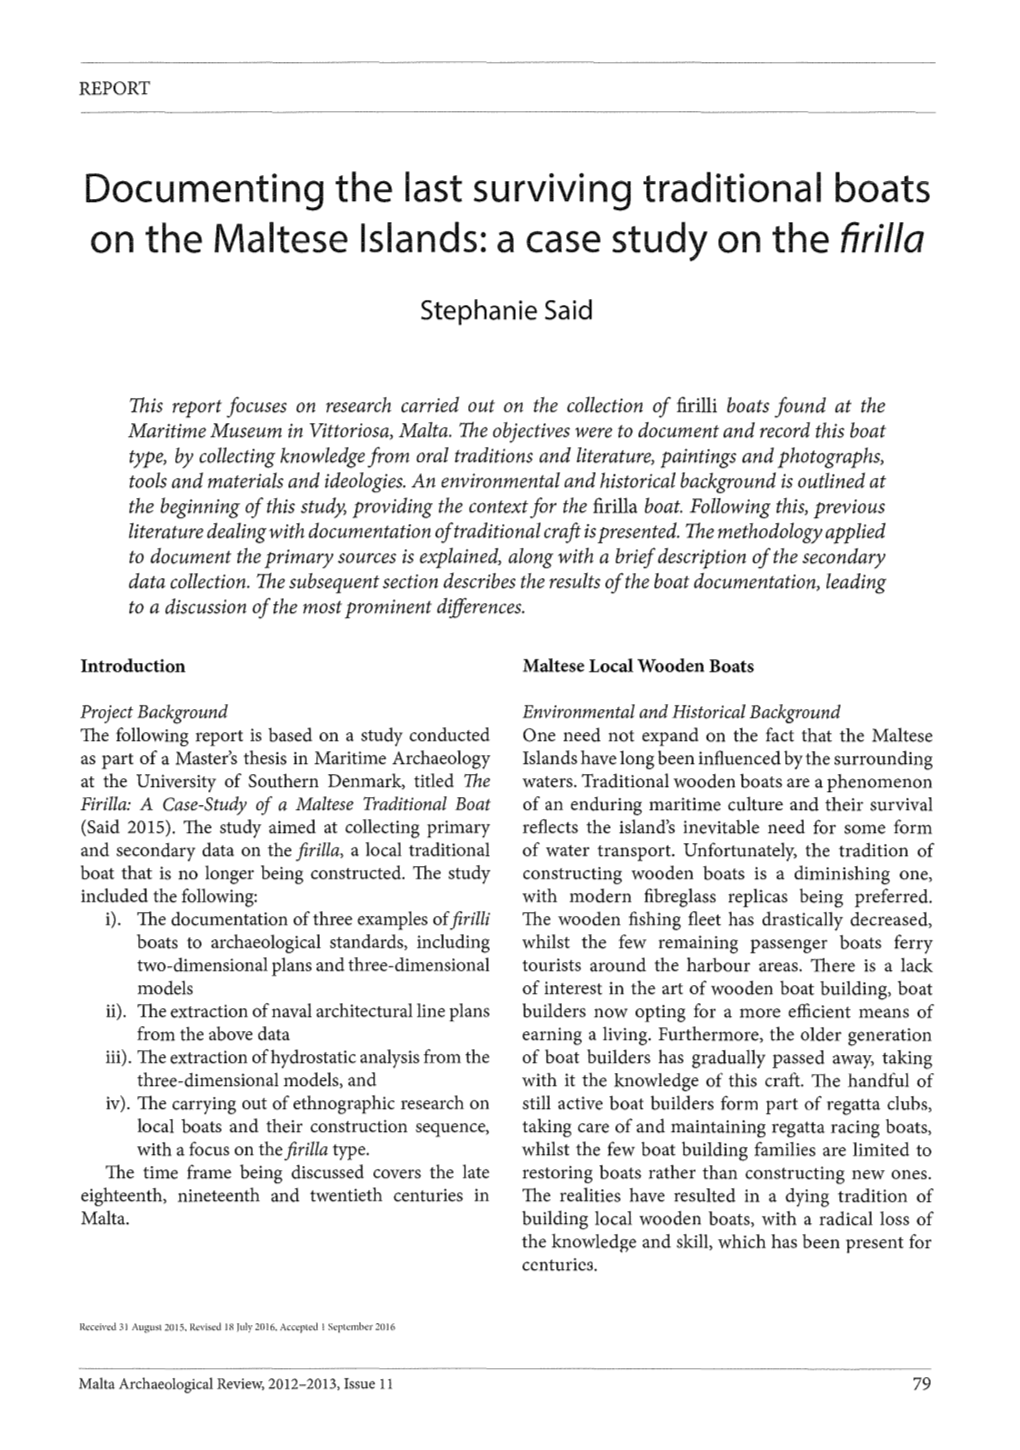 Documenting the Last Surviving Traditional Boats on the Maltese Islands: a Case Study on the Firilla